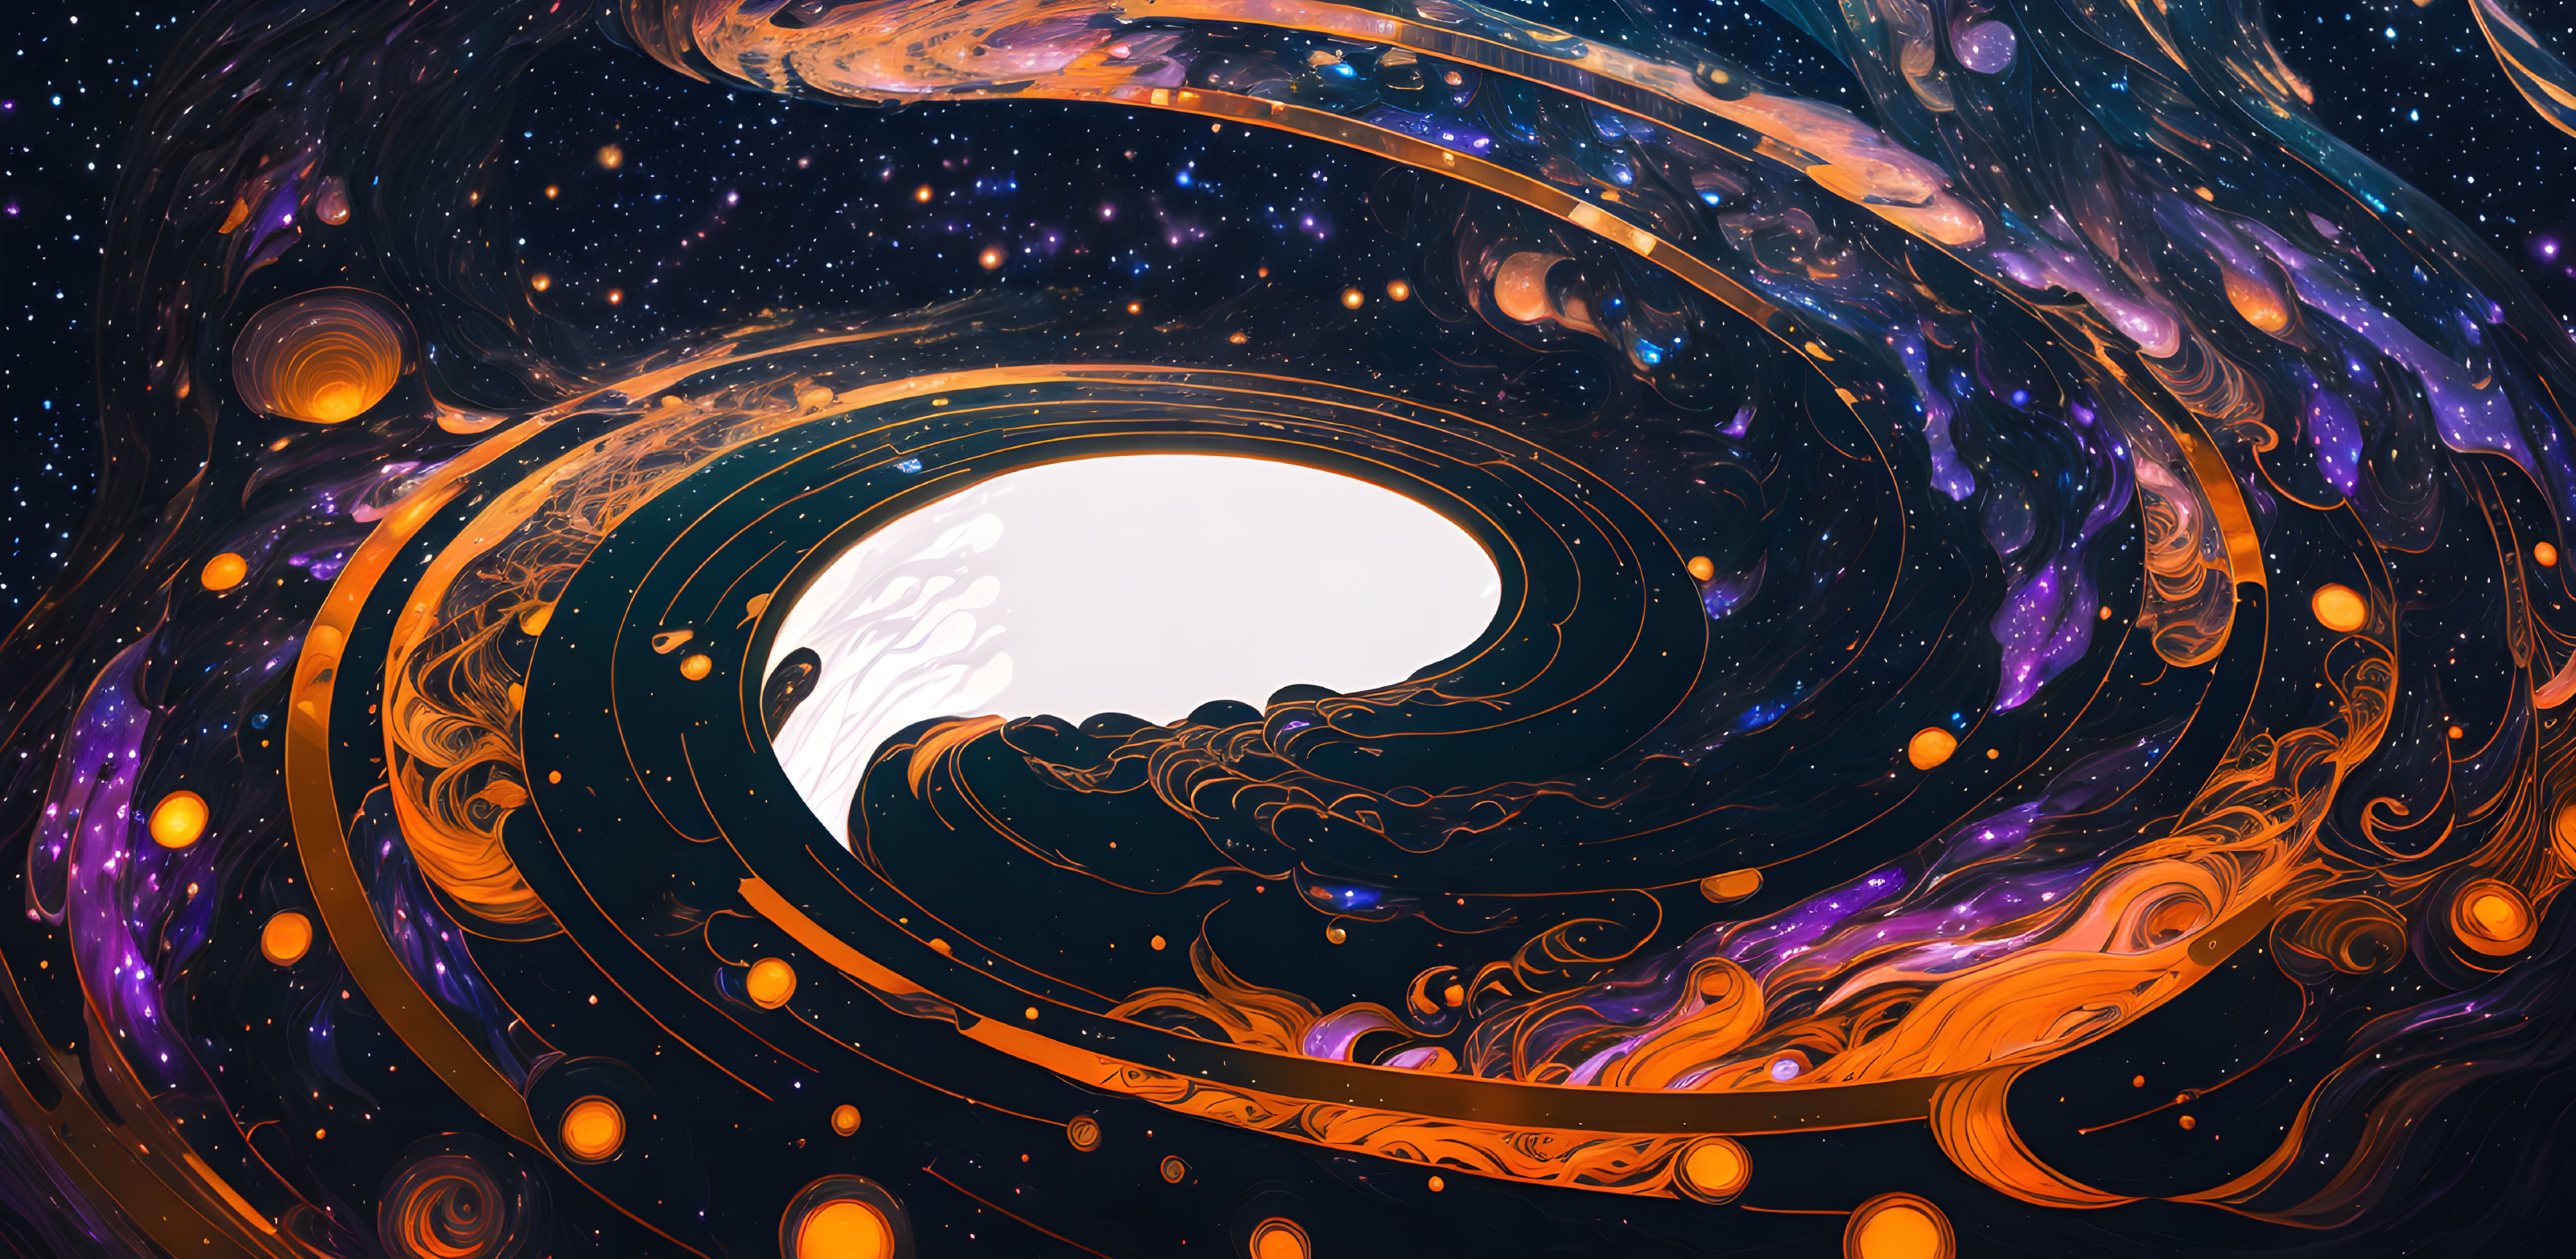 Swirling cosmic scene with celestial bodies in blue, purple, and orange